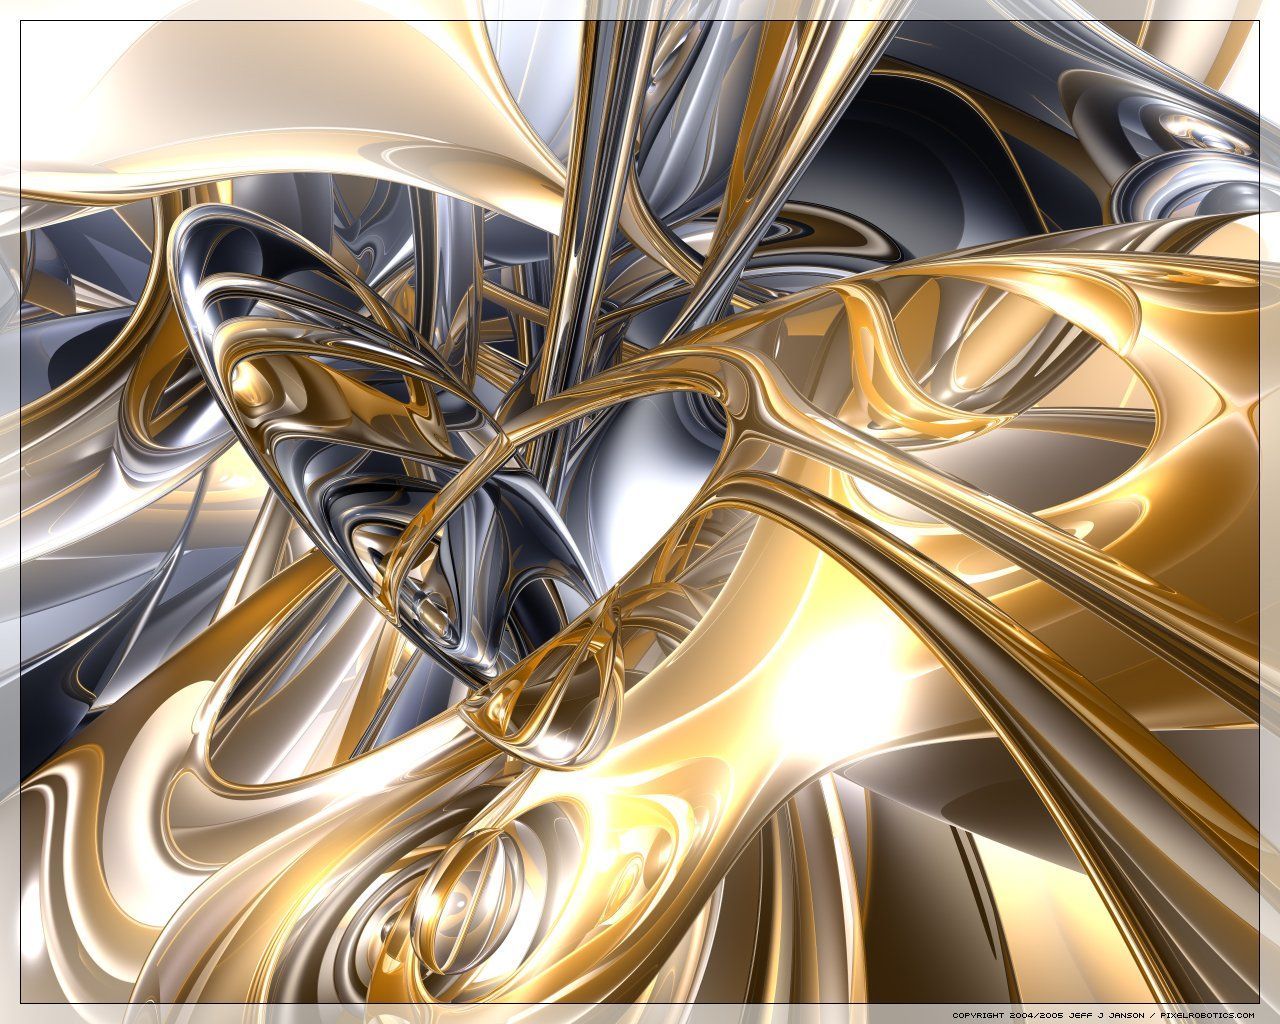 3D wallpaper of a metallic abstract background - Silver